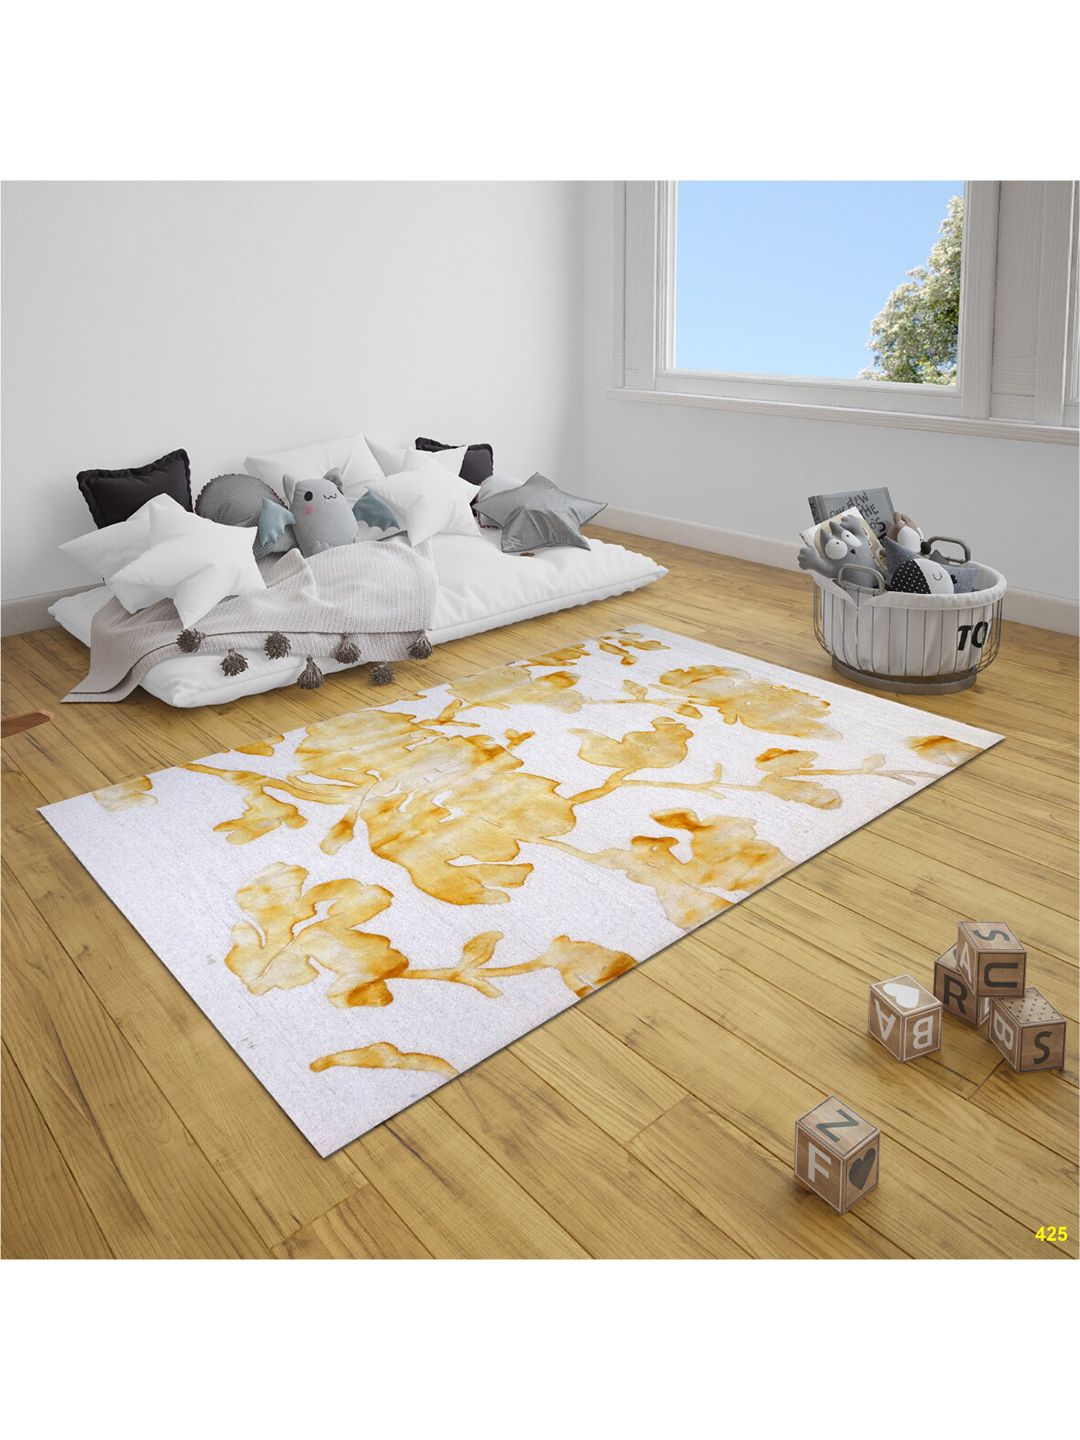 SANDED EDGE Yellow & White Printed Hand Tufted Woolen Floor Carpet Price in India